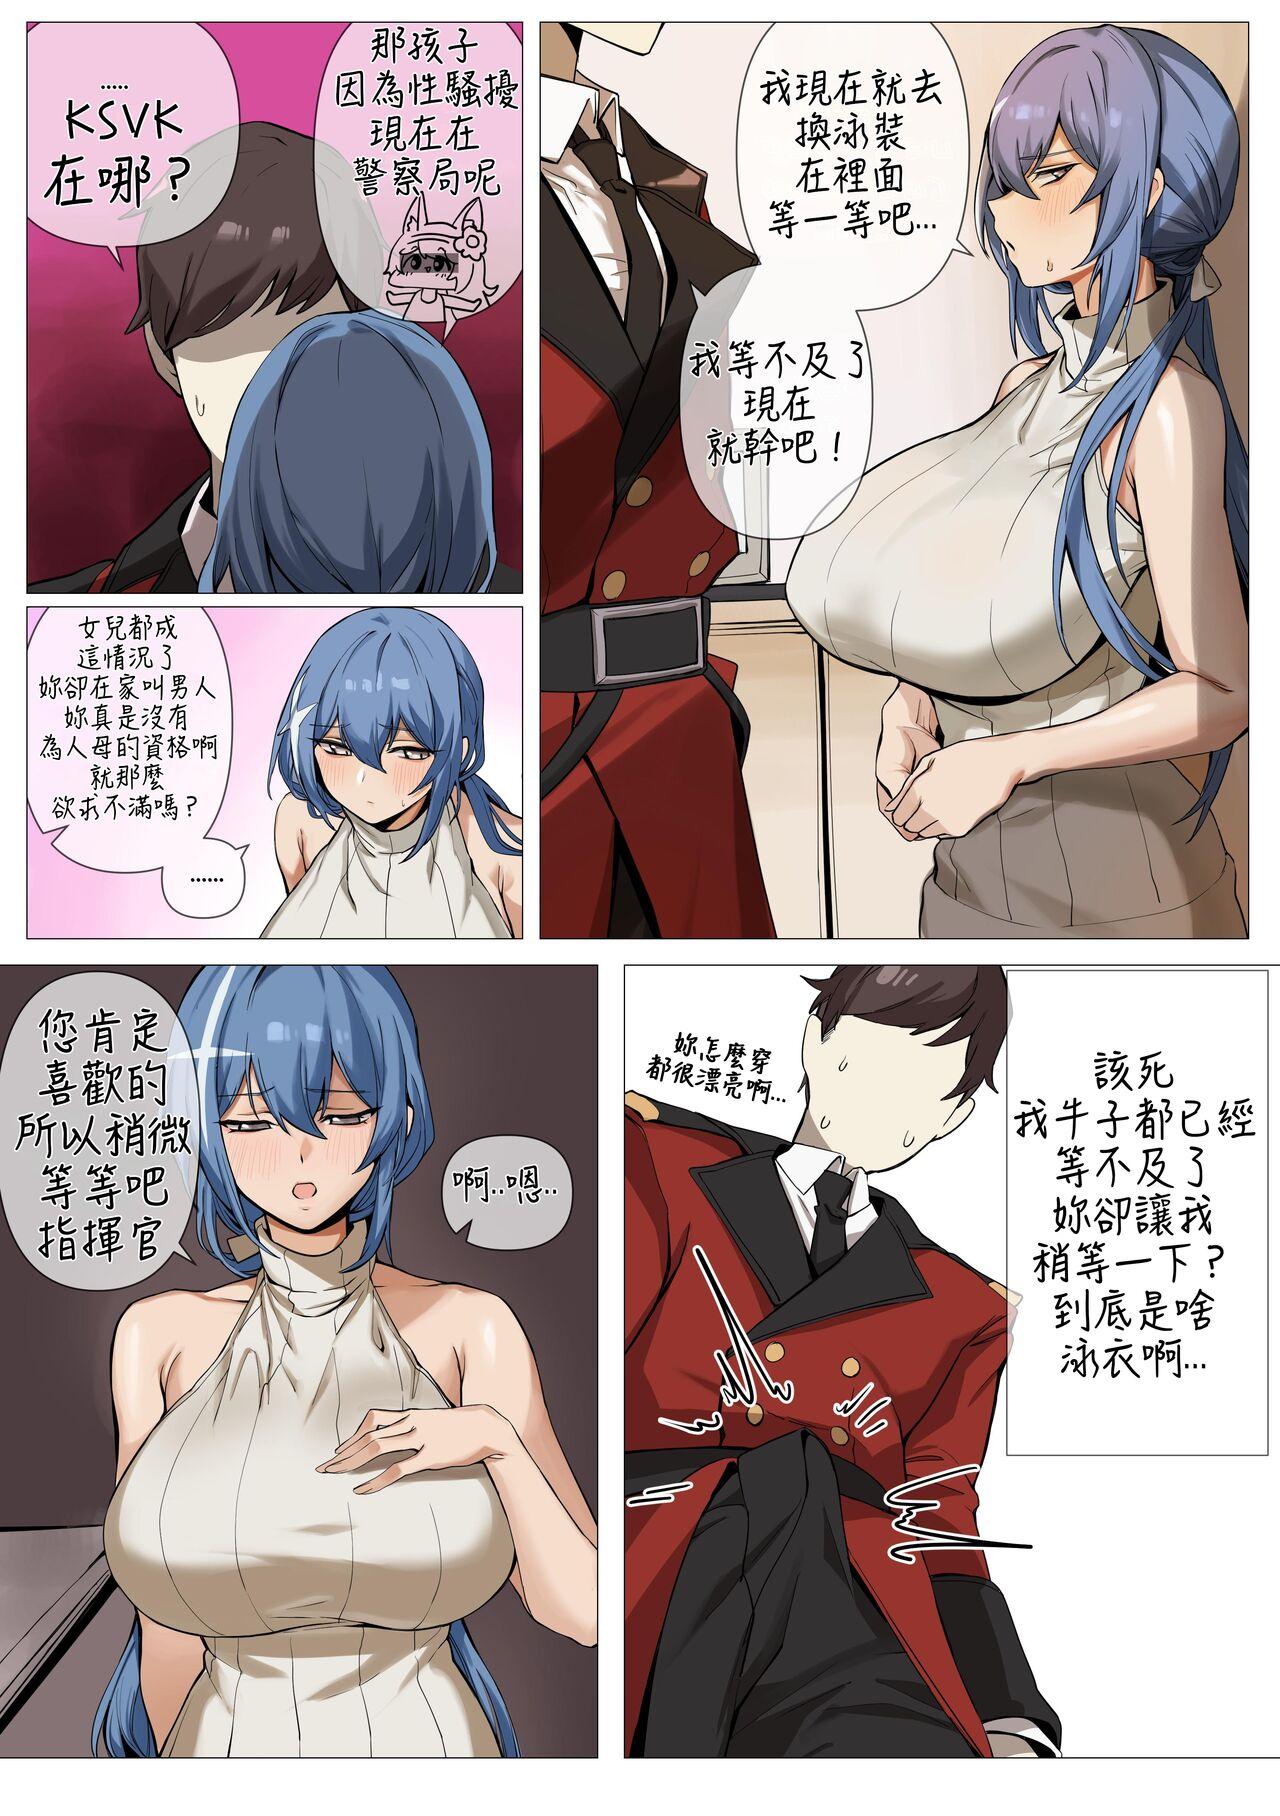 Real Amature Porn DP-12 - Girls frontline Sucking Dick - Page 4